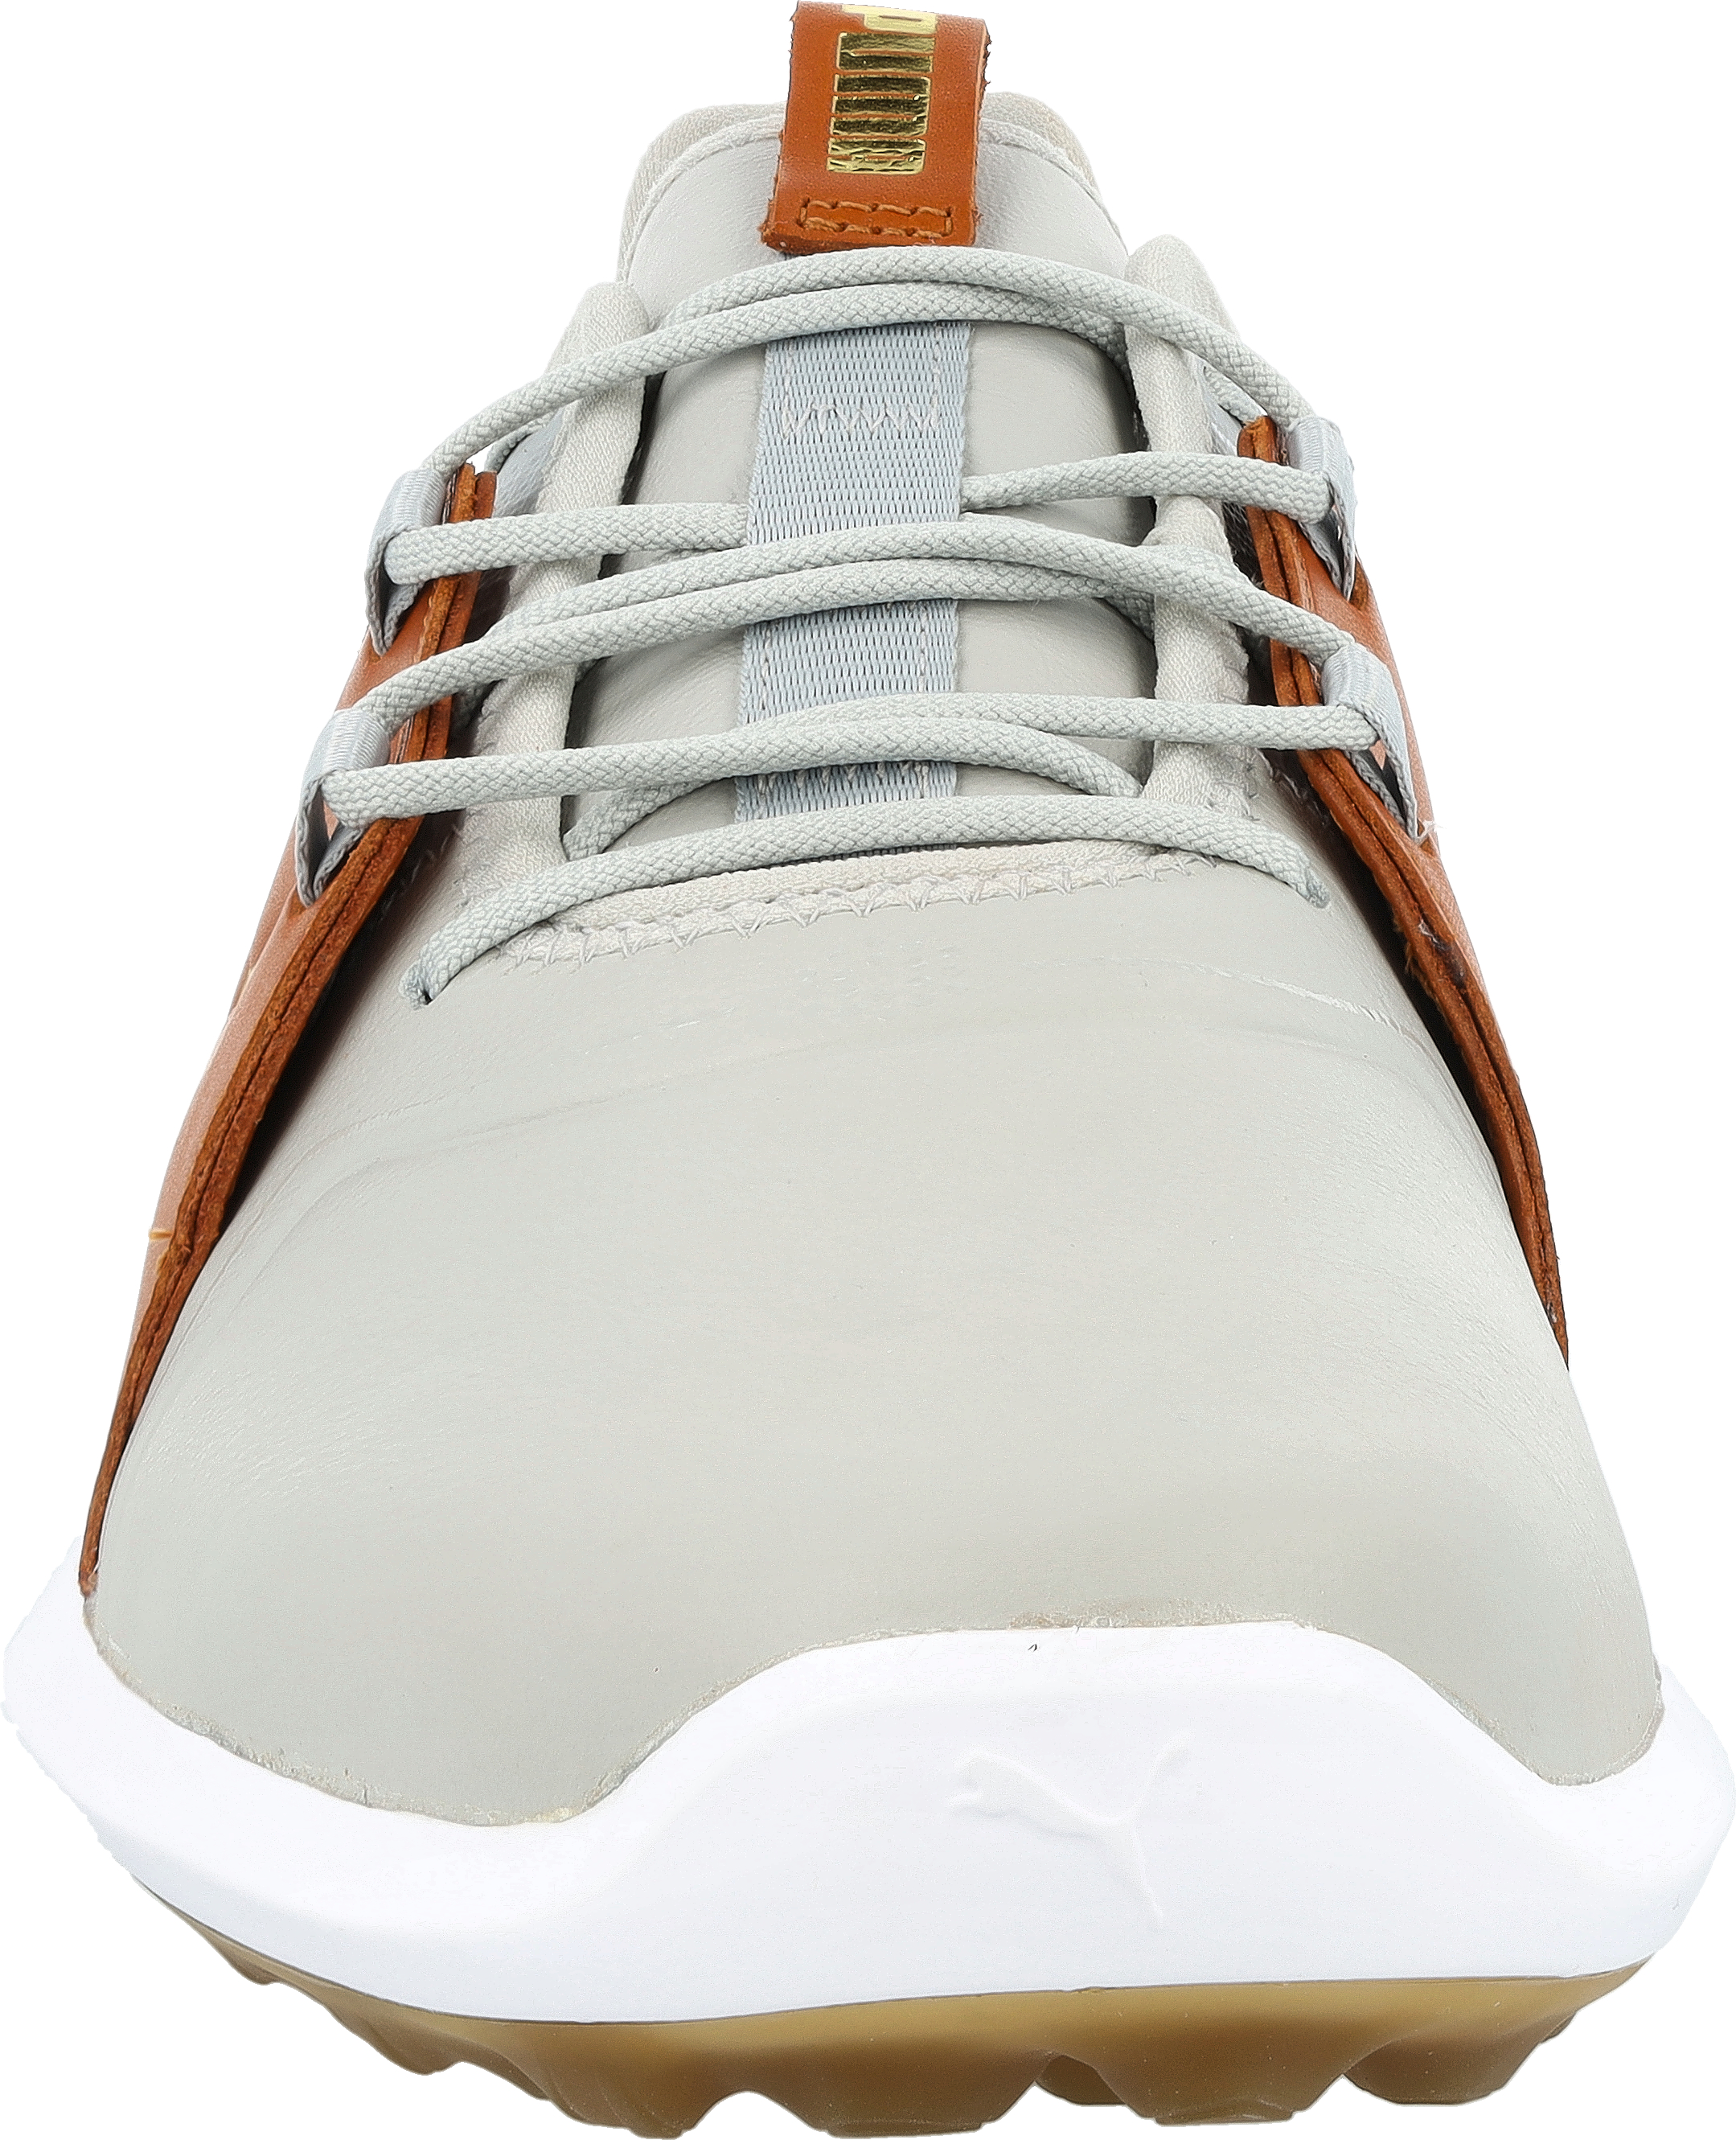 Puma Ignite Fasten8 Crafted Rise/Gold/Brown Men Spikeless Golf Shoes Choose Size - image 3 of 8